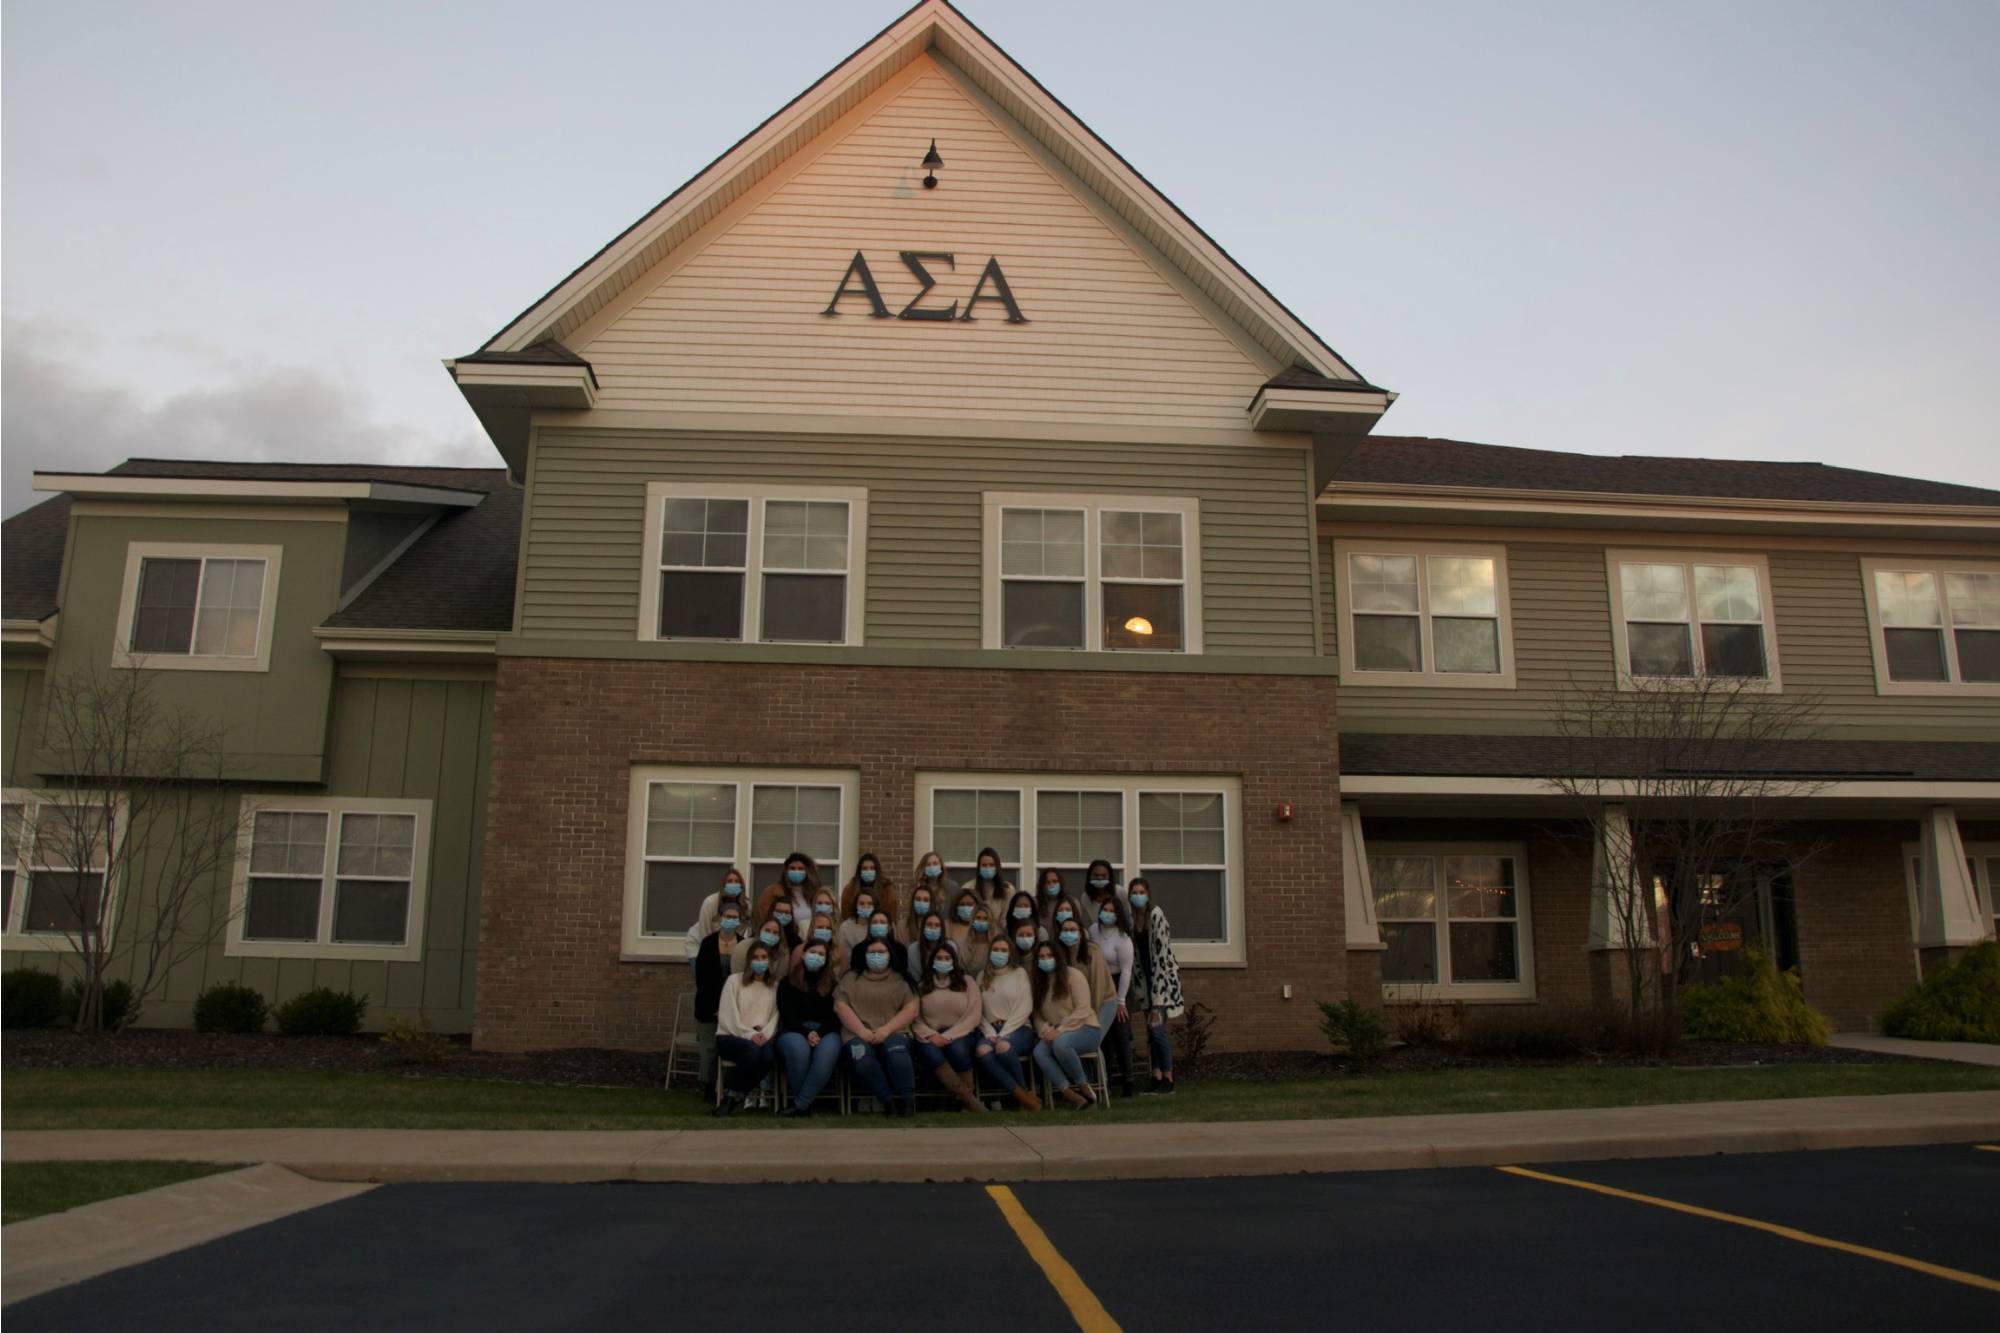 Alpha Sigma Alpha members posing together in masks in front of their house.